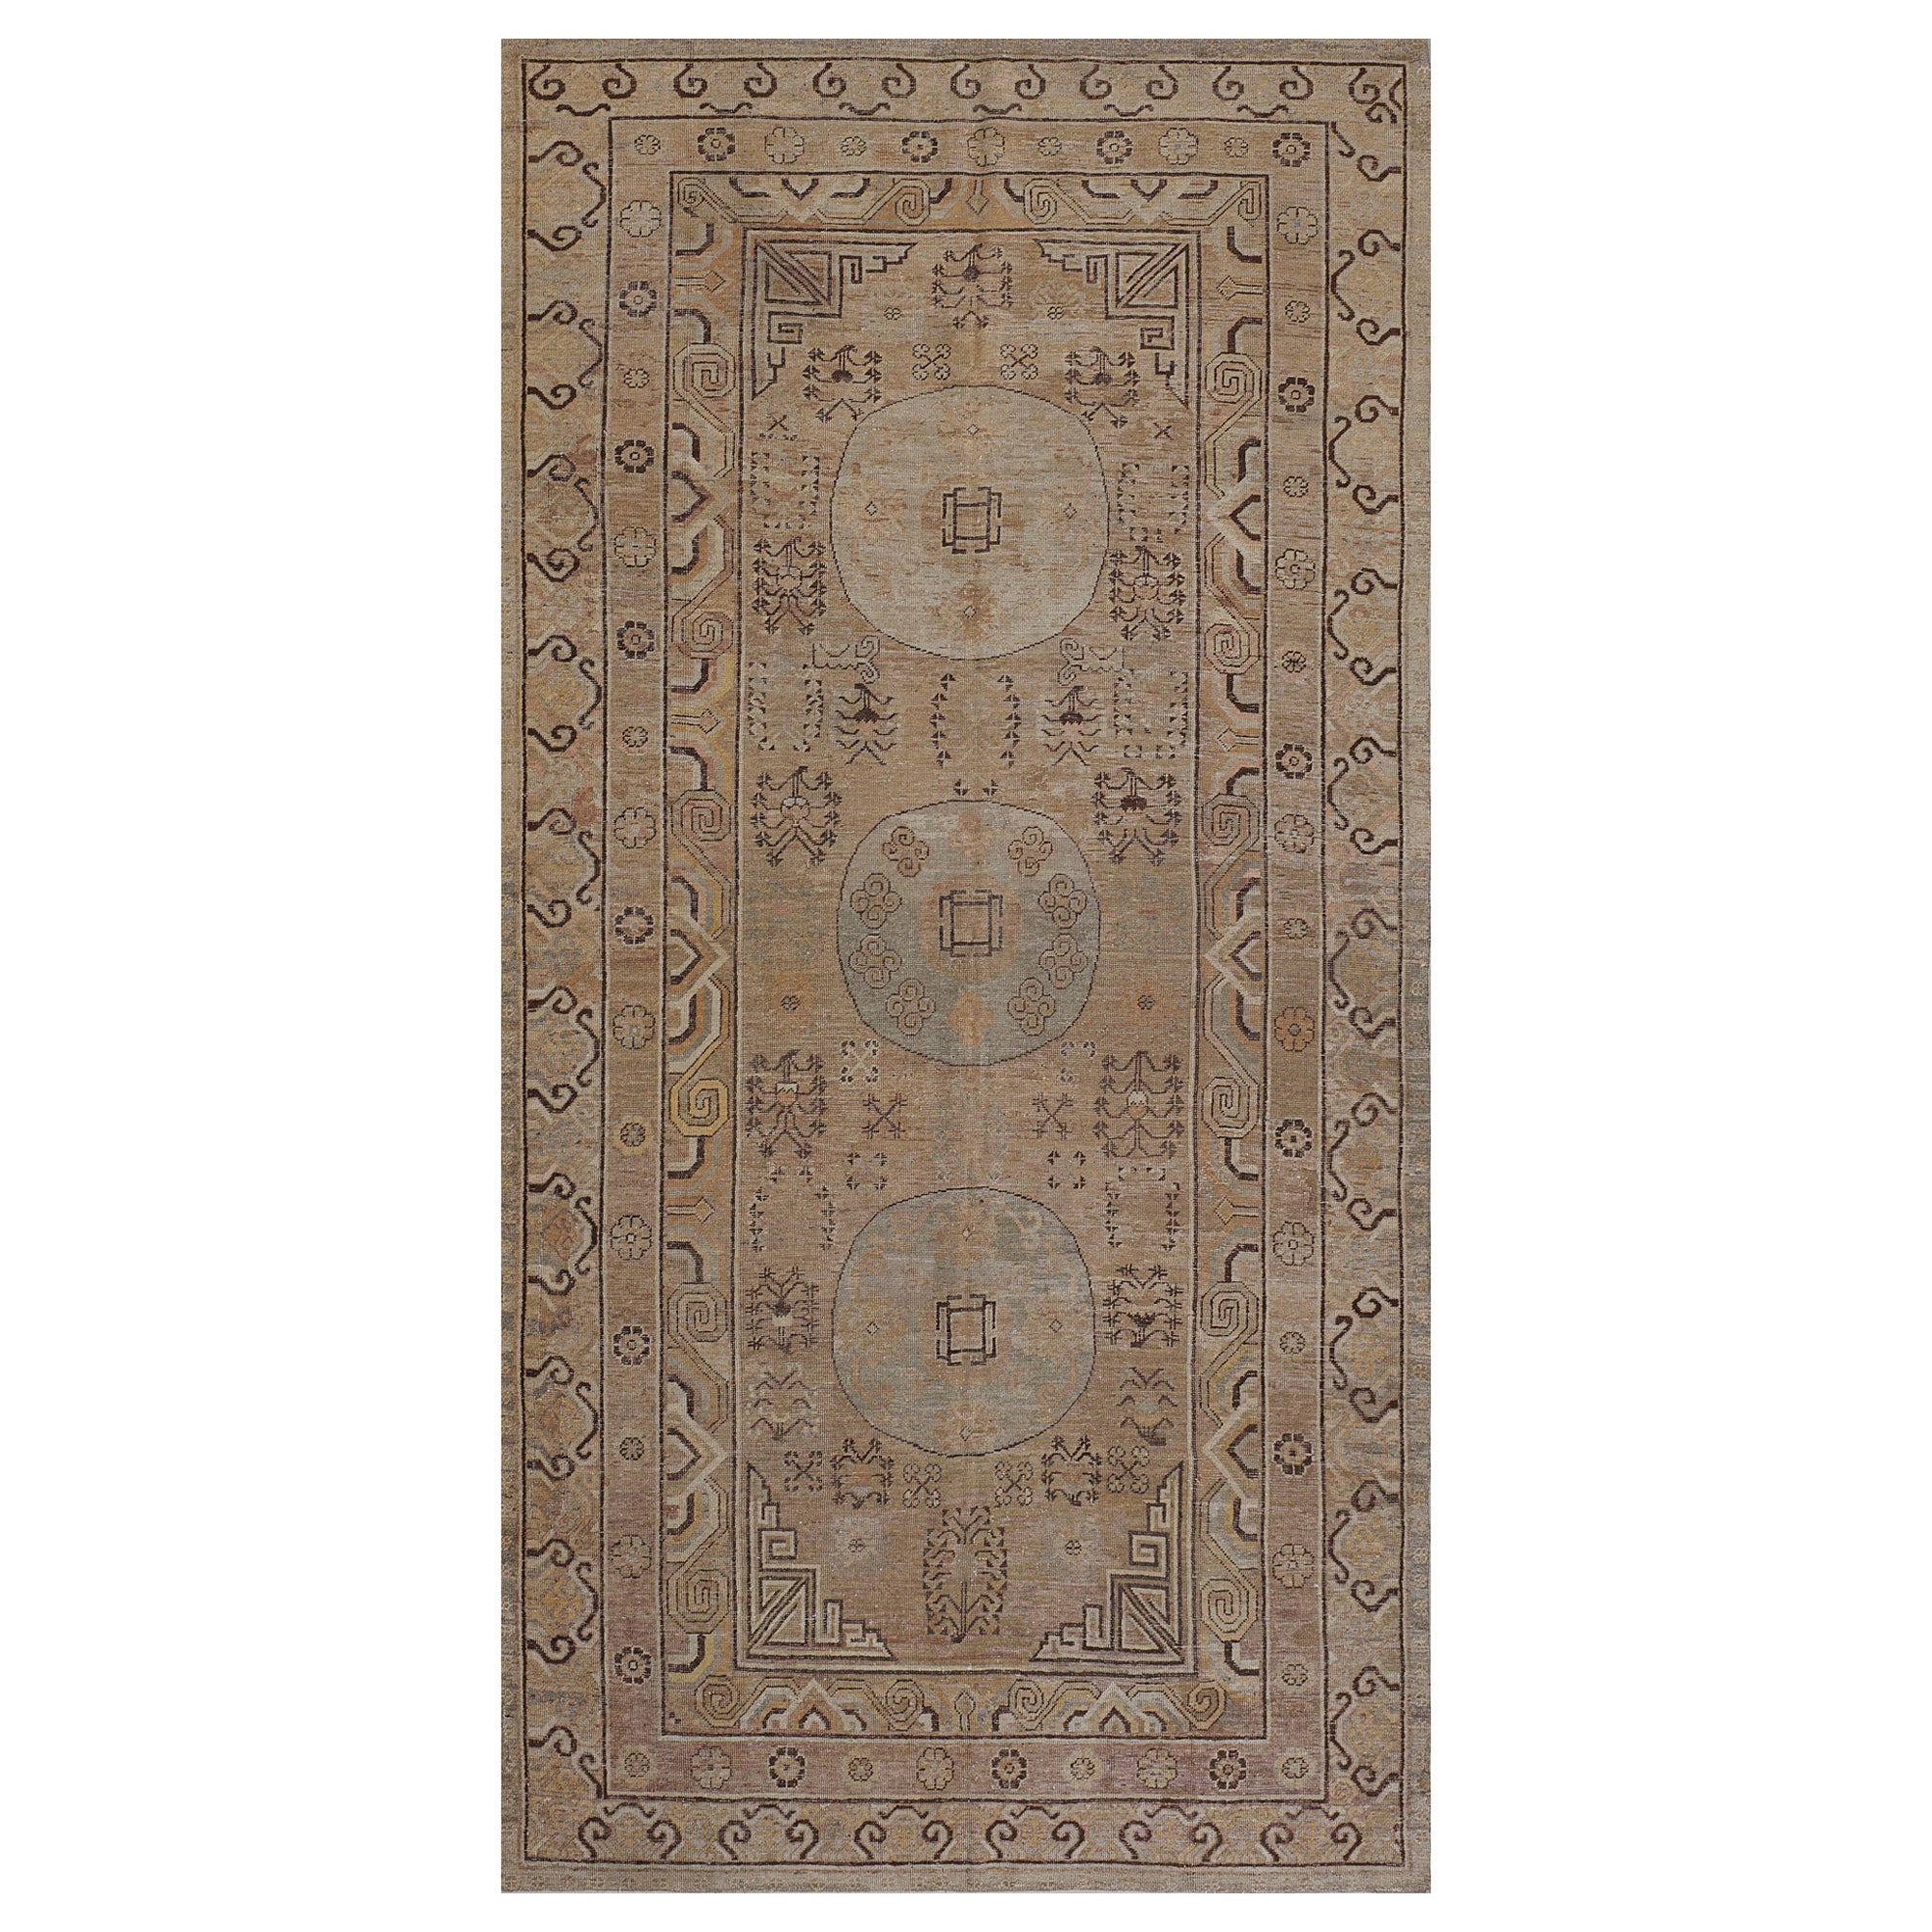 Antique Hand-woven Wool Khotan Rug For Sale